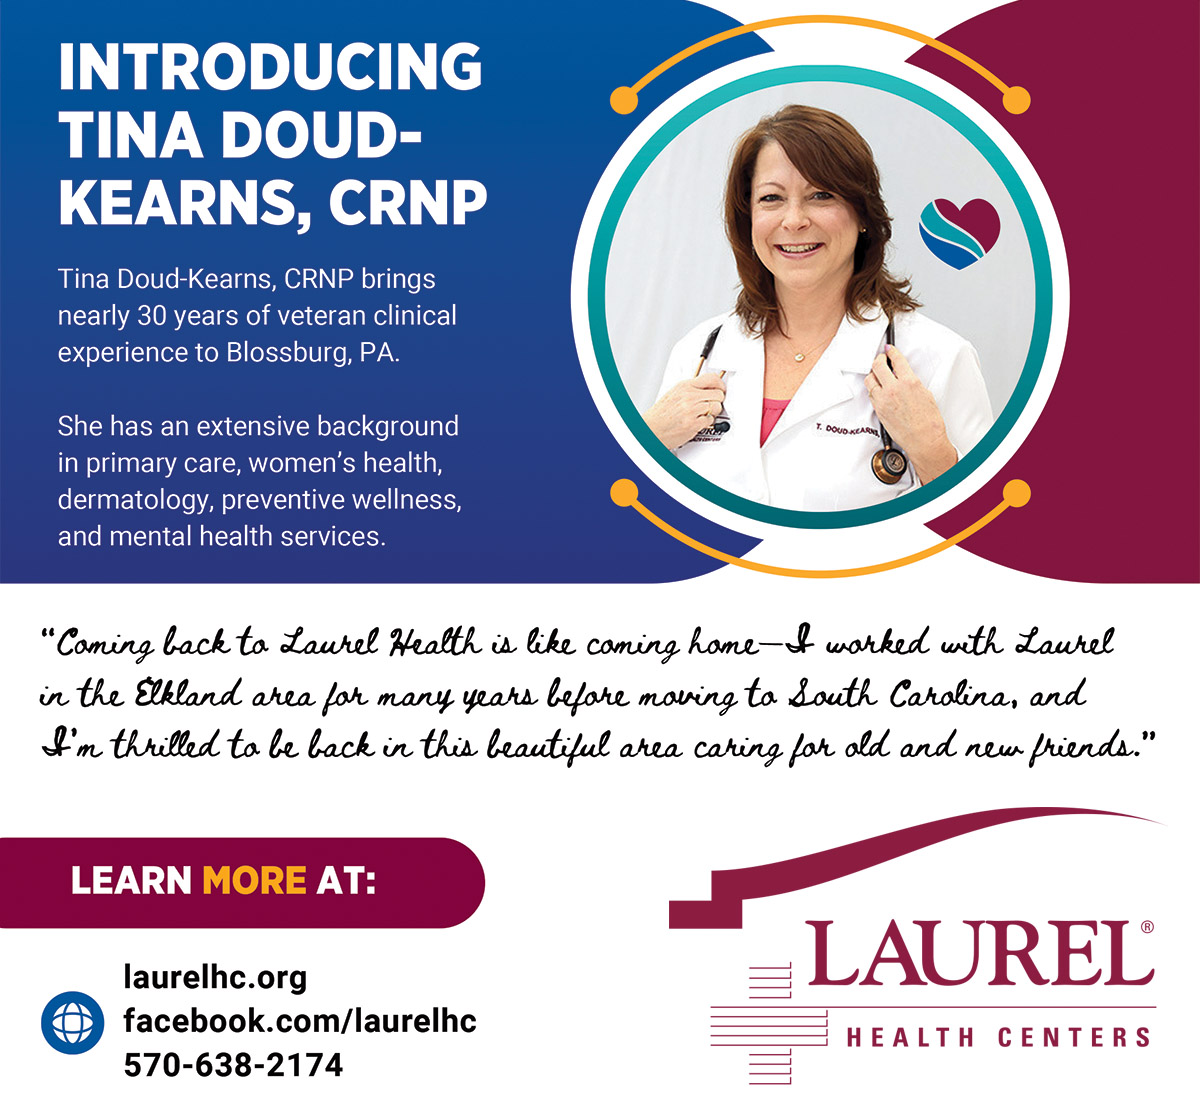 Infographic featuring Tina Doud-Kearns, CRNP, a certified registered nurse practitioner with Blossburg Laurel Health Center; Tina specializes in dermatology and women's health